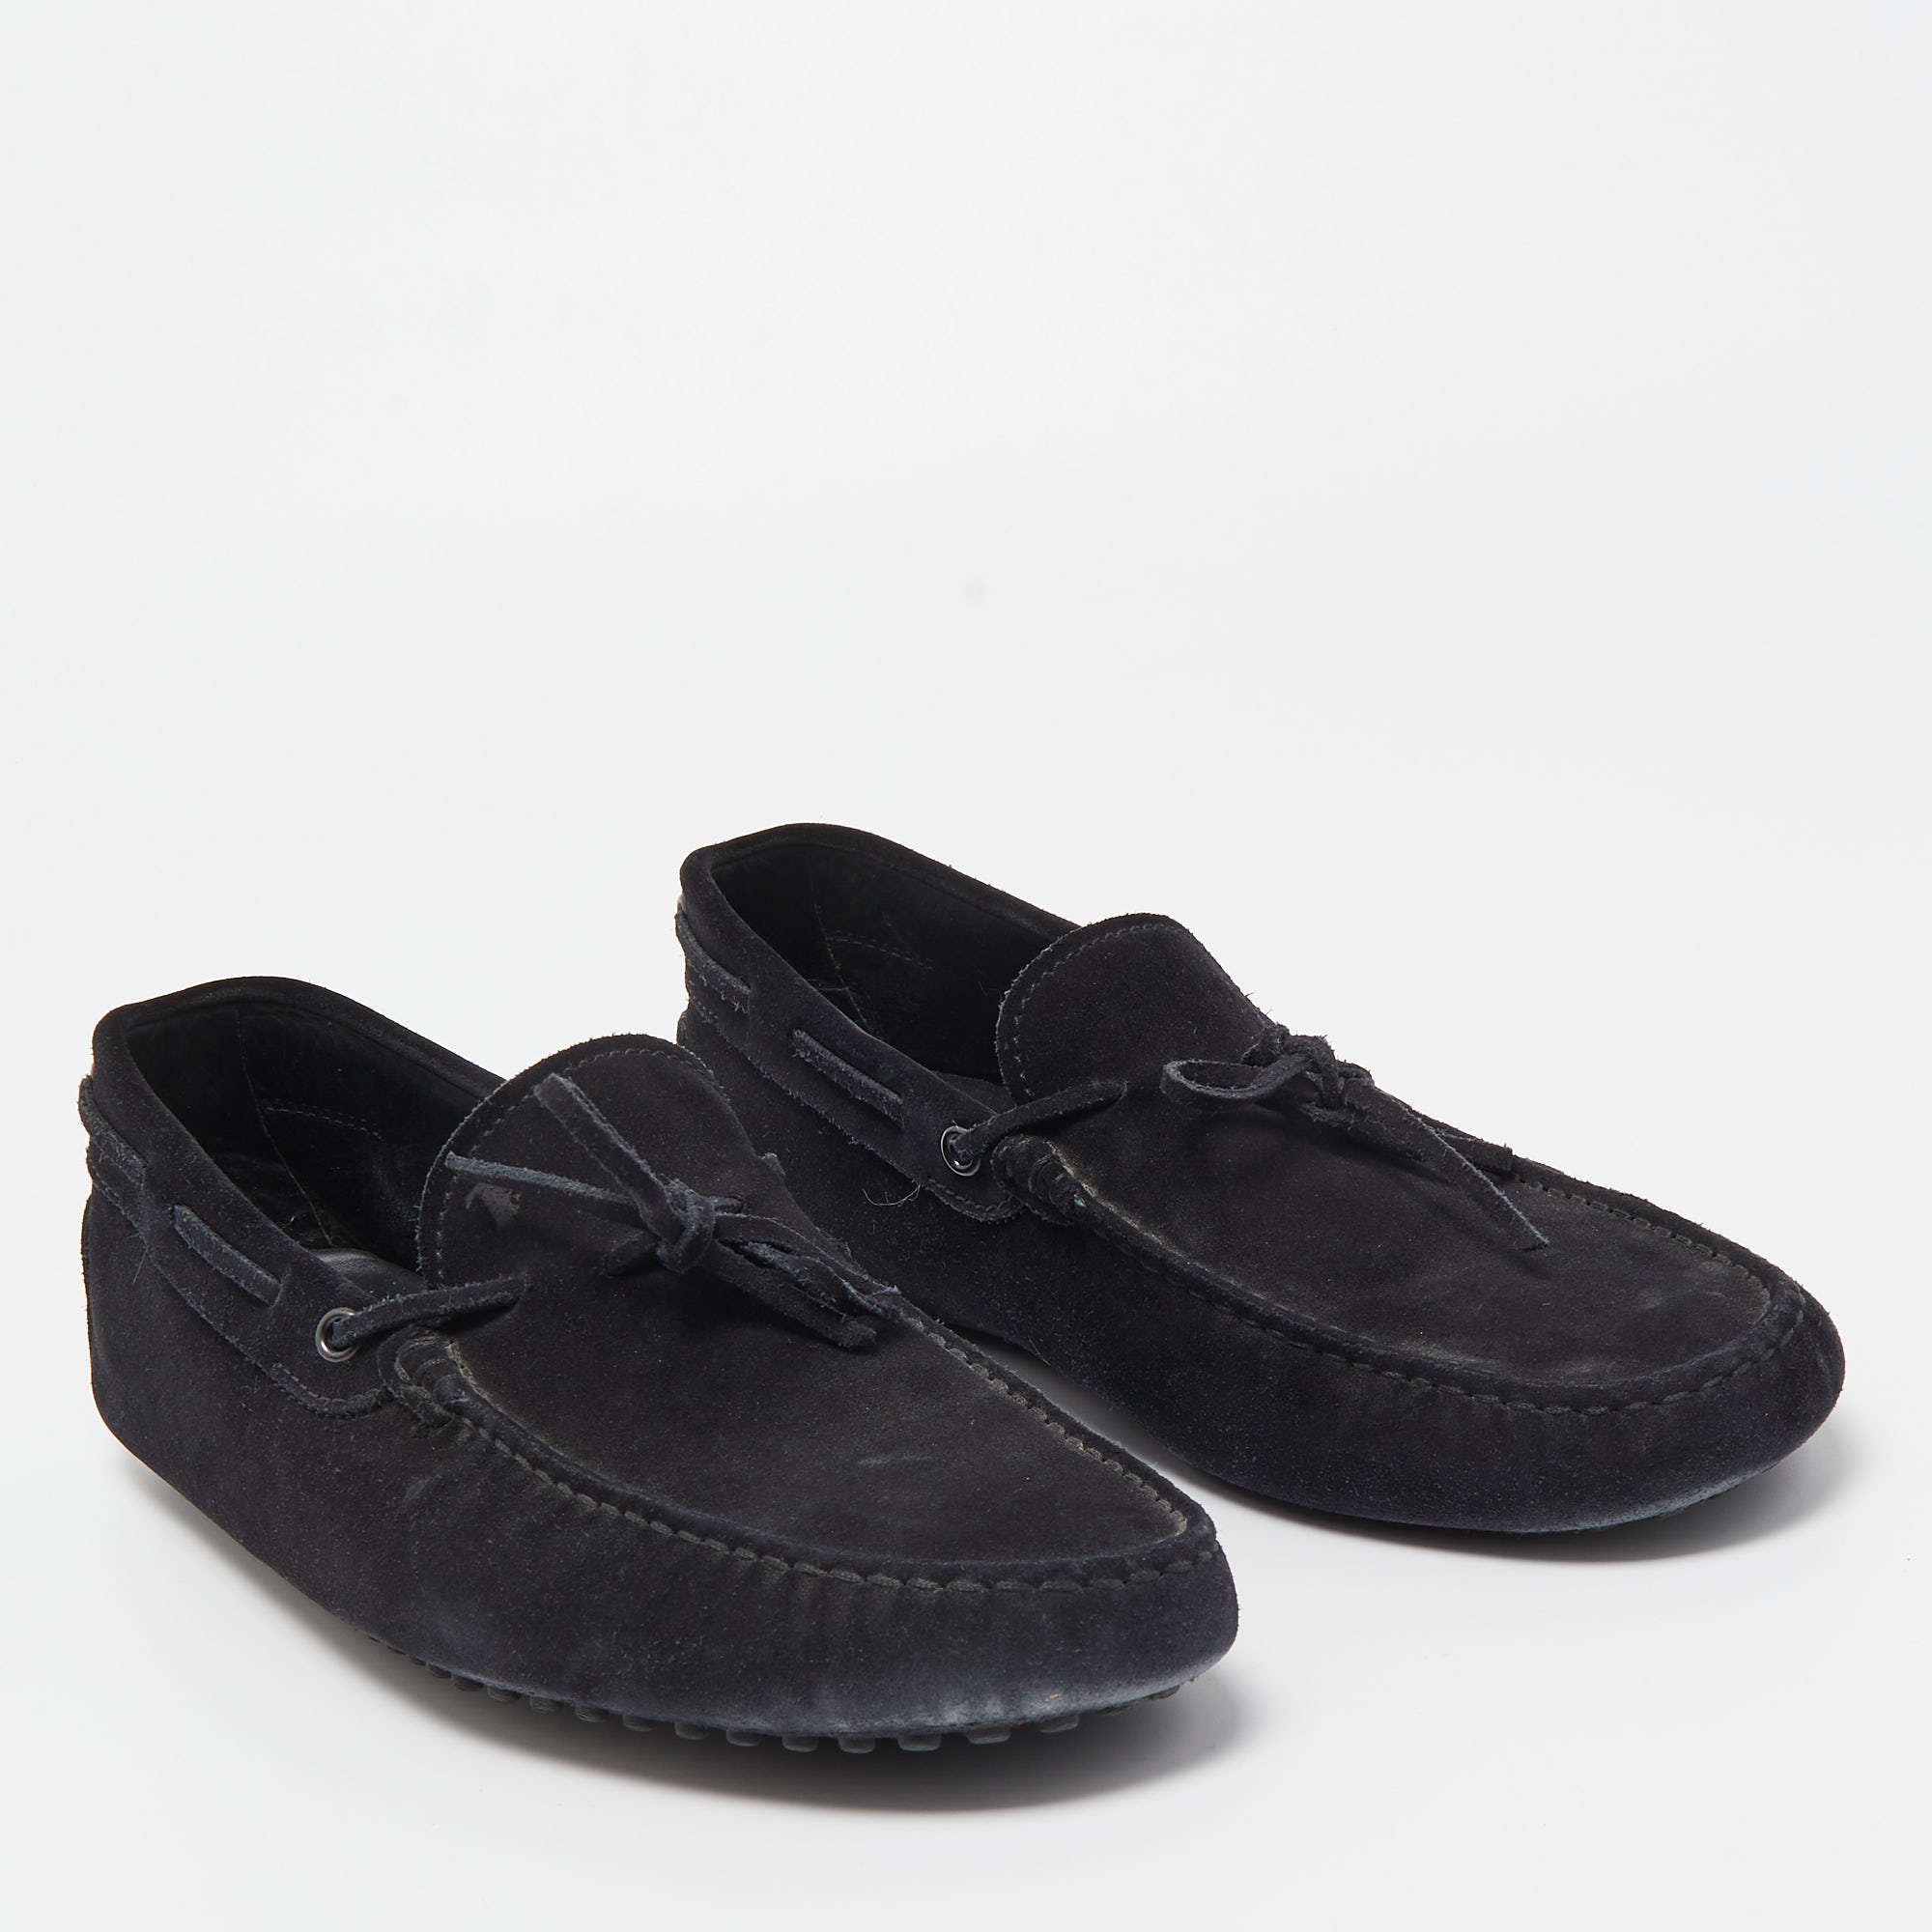 Tod's Black Suede Gommino Driving Loafers Size 43